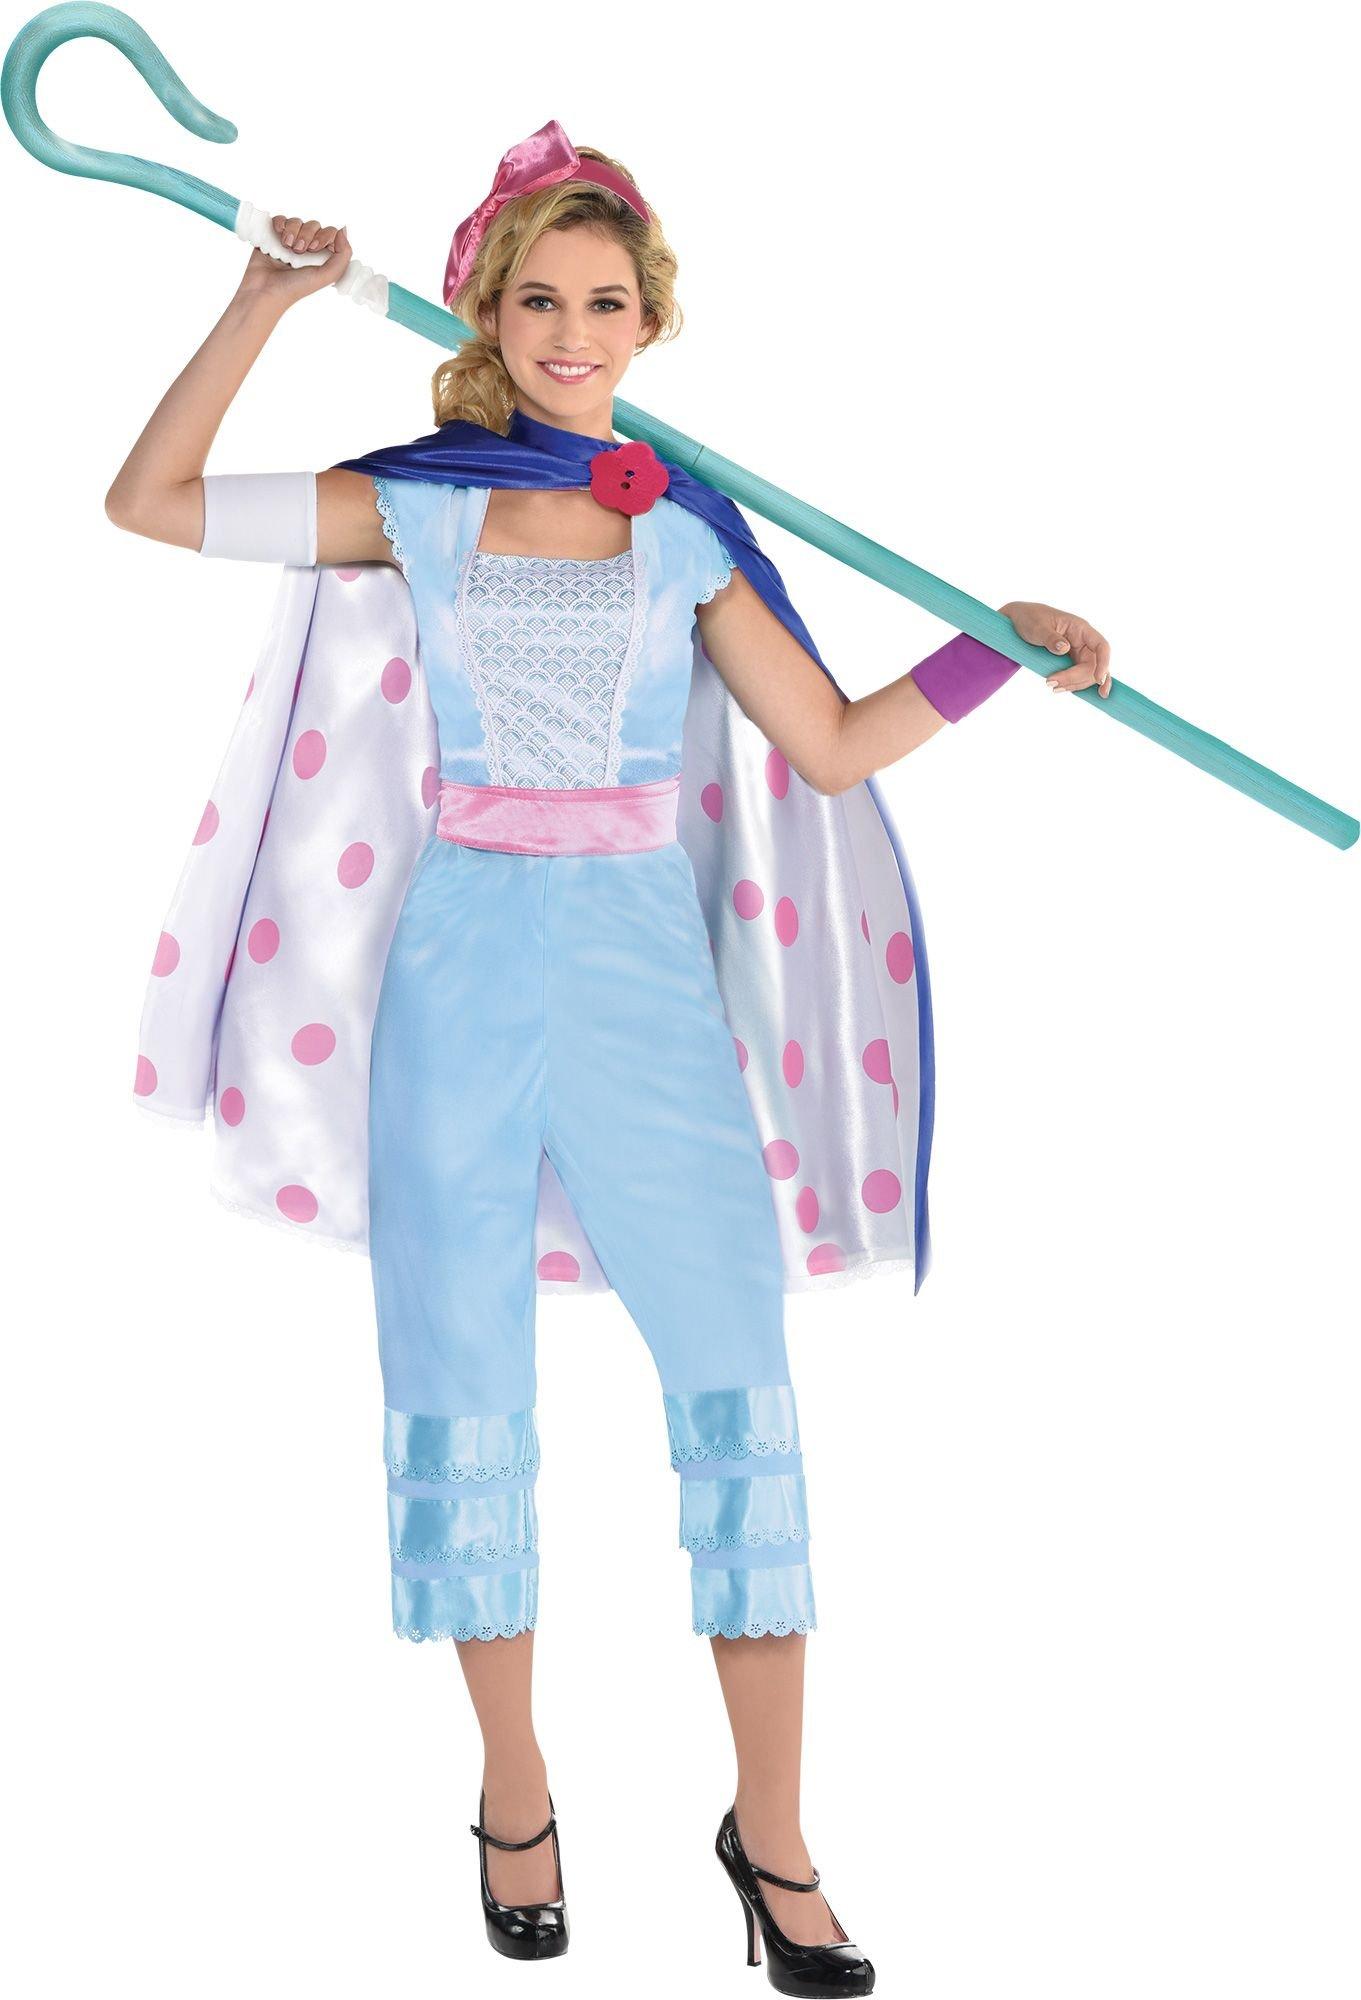 Little Bo Peep Costume for Adults - Toy Story 4